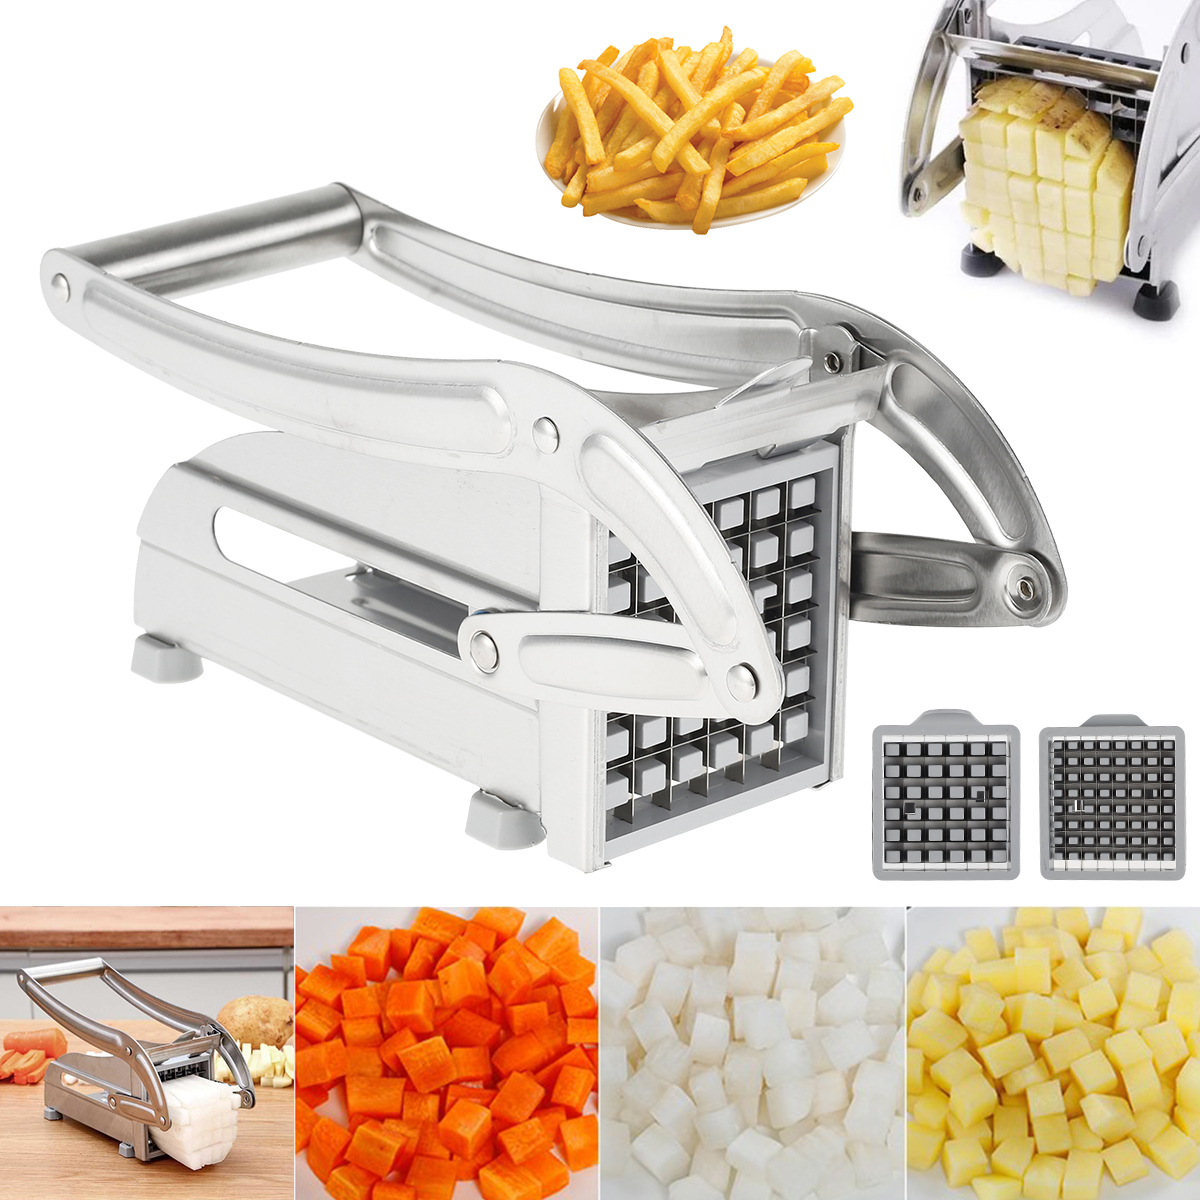 Duety French Fry Cutter Multifunction Potato Slicer Vegetable Fruit Chopper  with Stainless Steel Blades for French Fries Chips Maker Potato Slicer  for Tomato Potato Cooking Gadget Tool